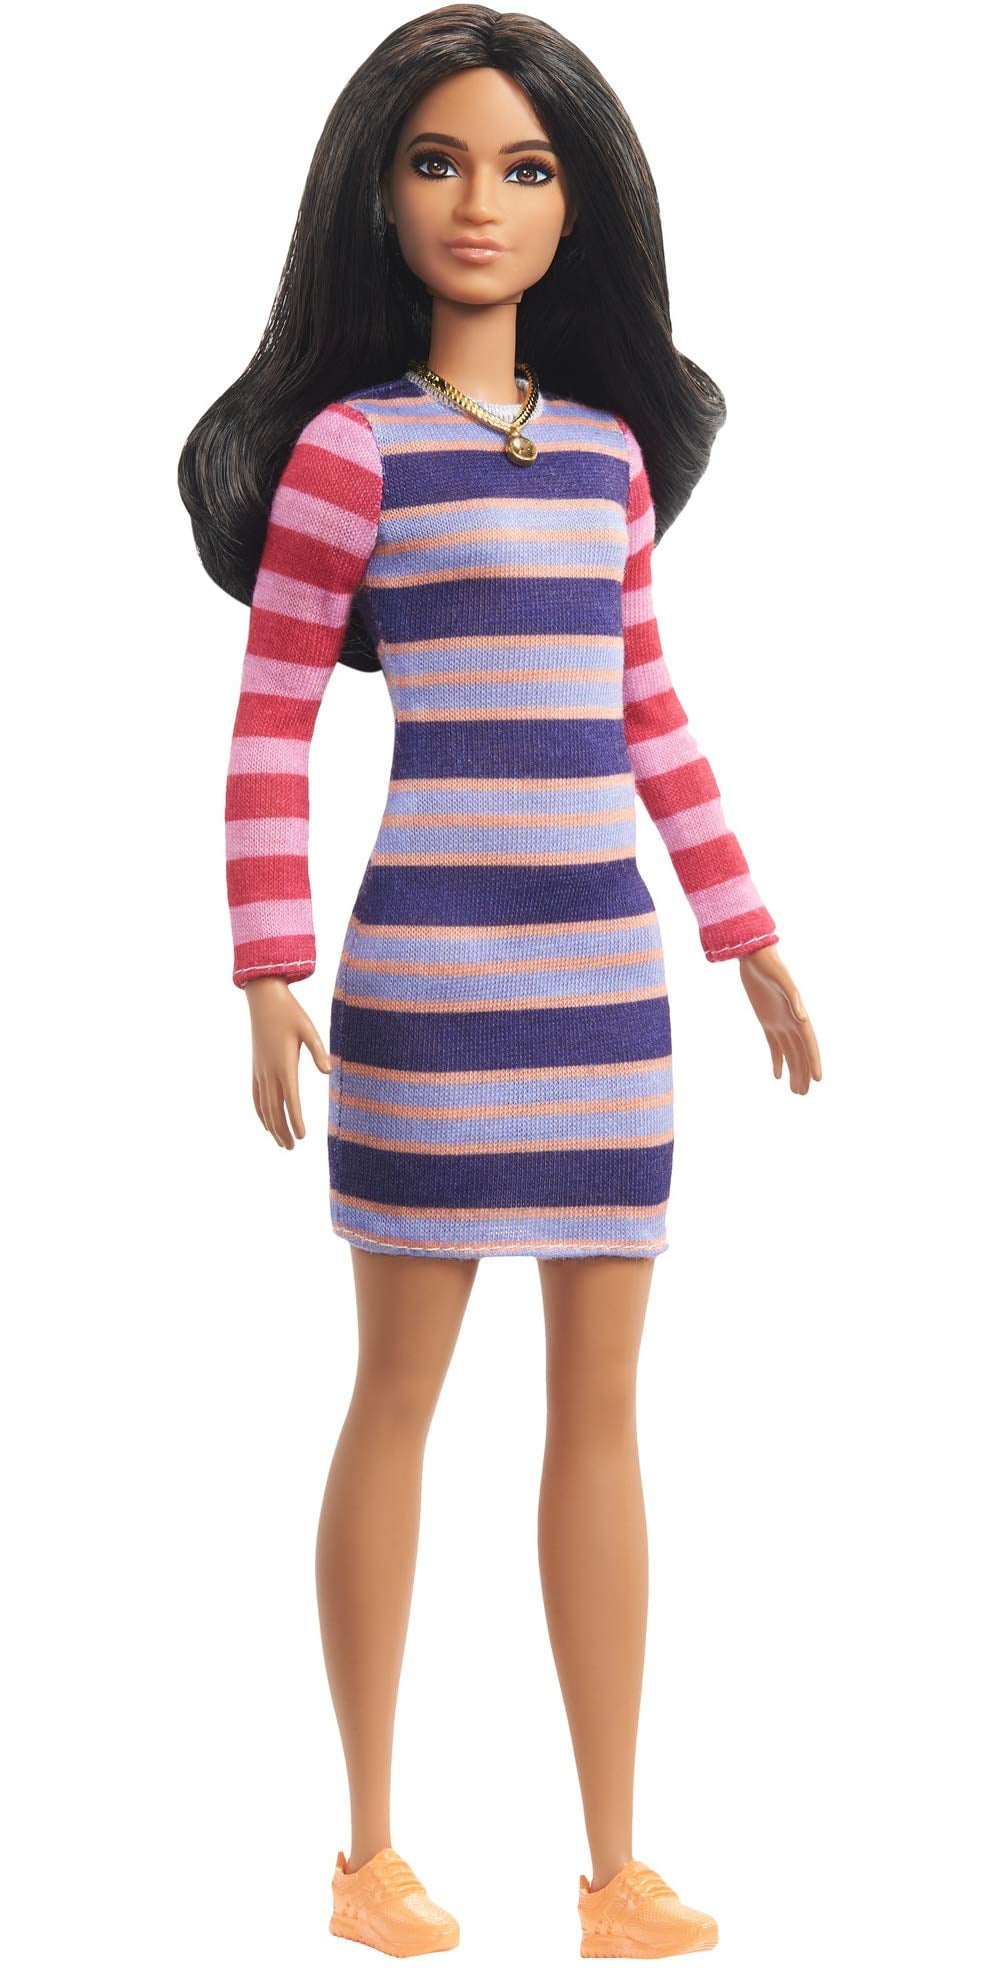 Barbie Fashionistas Doll #147 With Long Brunette Hair & Striped Dress ...